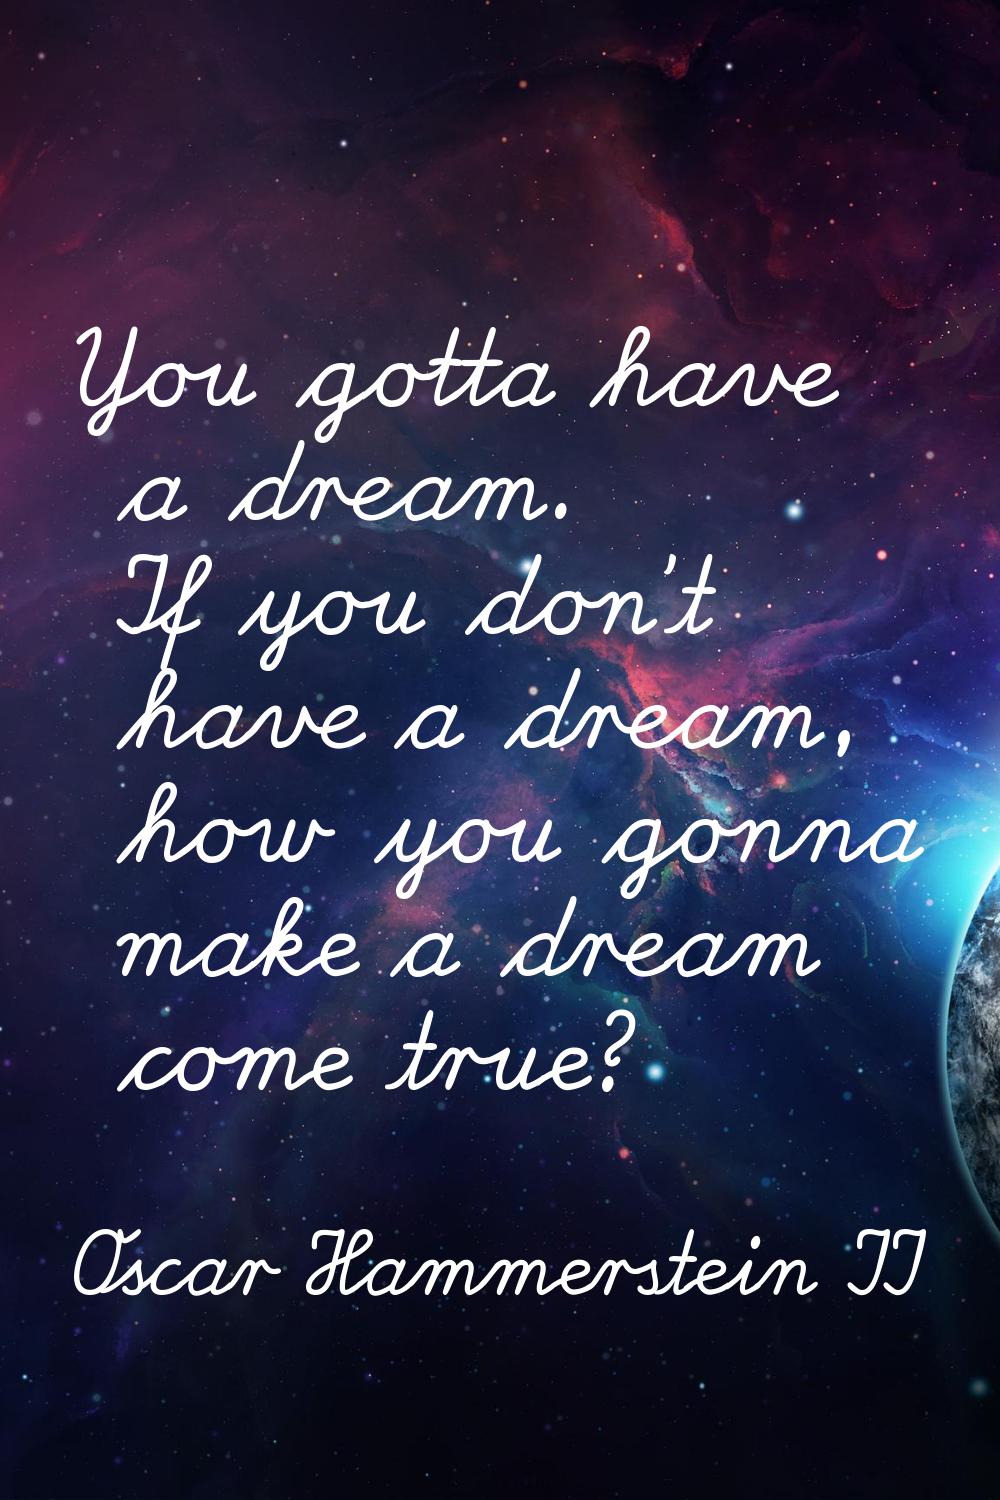 You gotta have a dream. If you don't have a dream, how you gonna make a dream come true?